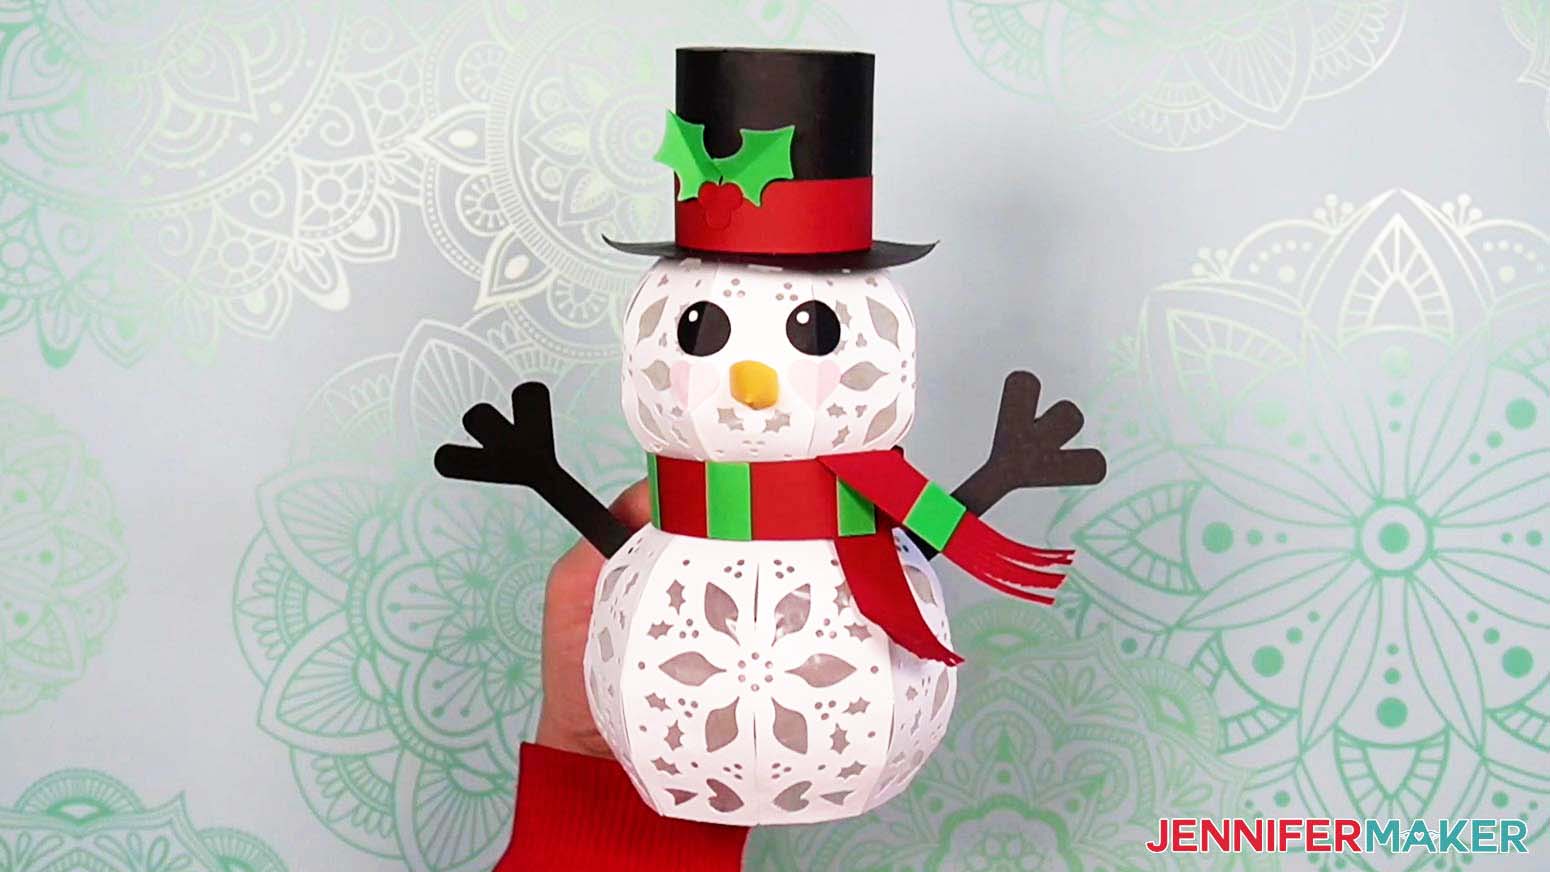 Glue the stripes to the light up snowman's scarf and fluff the tassels at the ends